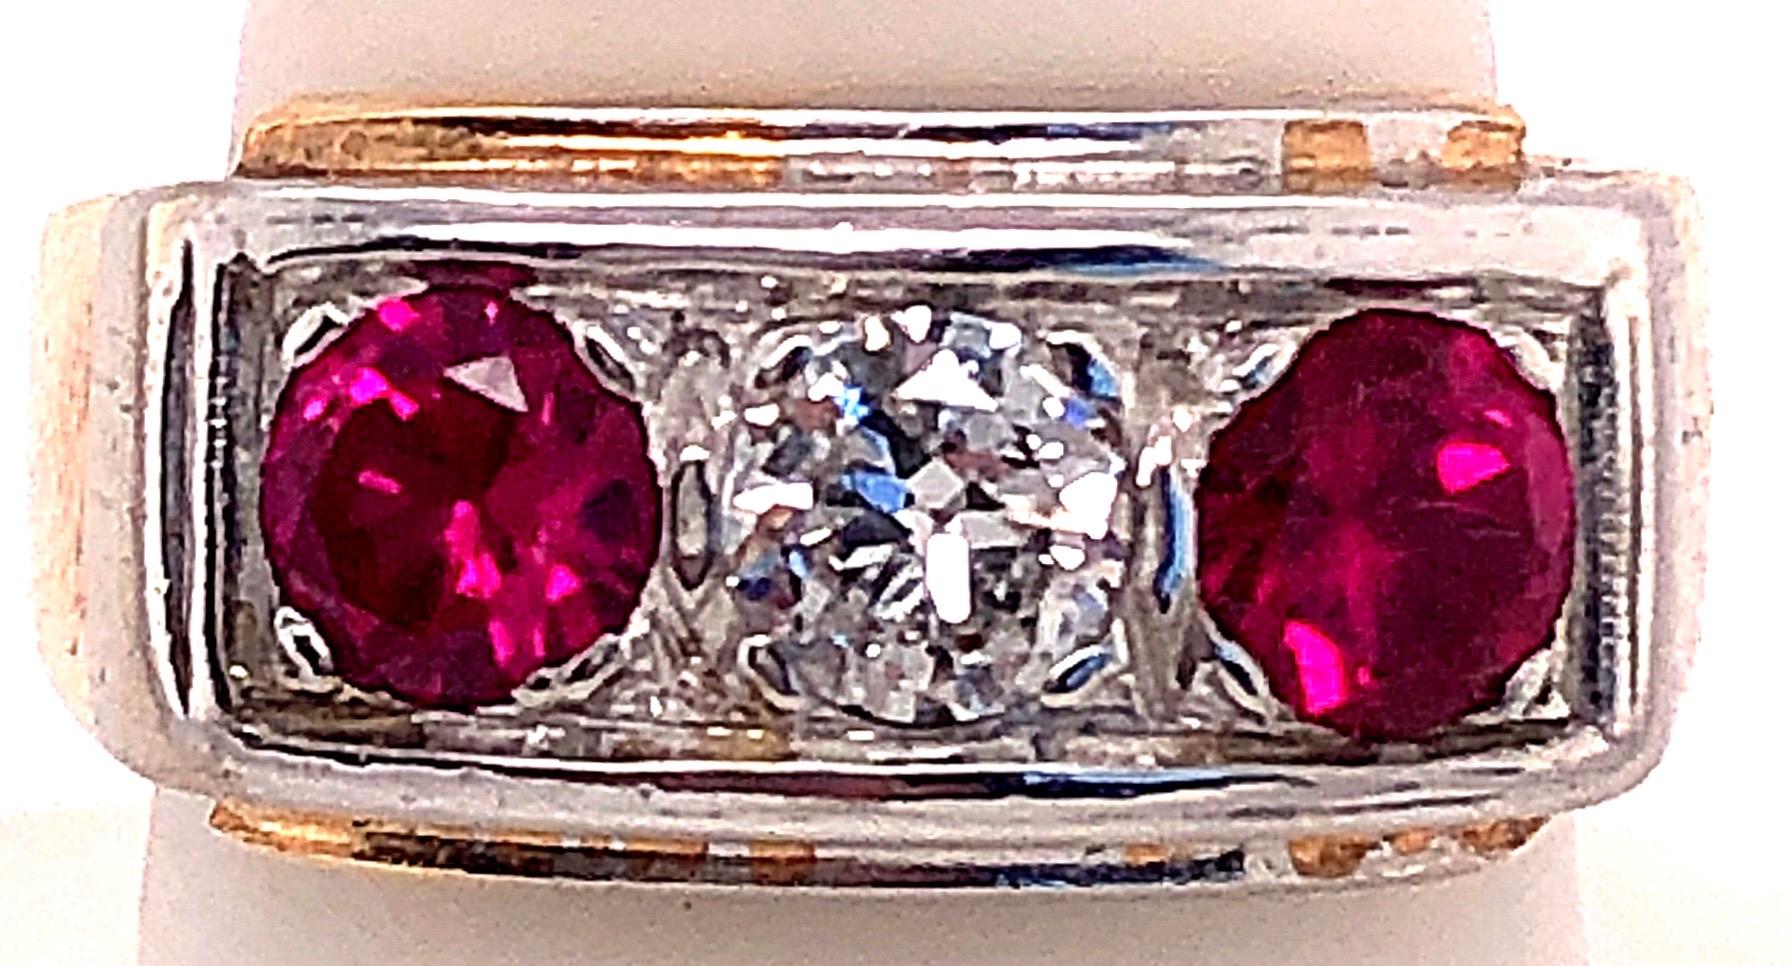 14 Karat Yellow and White Gold Three Stone Diamond and Ruby Band Ring
0.65 total diamond weight.
Size 8
8.90 grams total weight.
9.74 ring height.